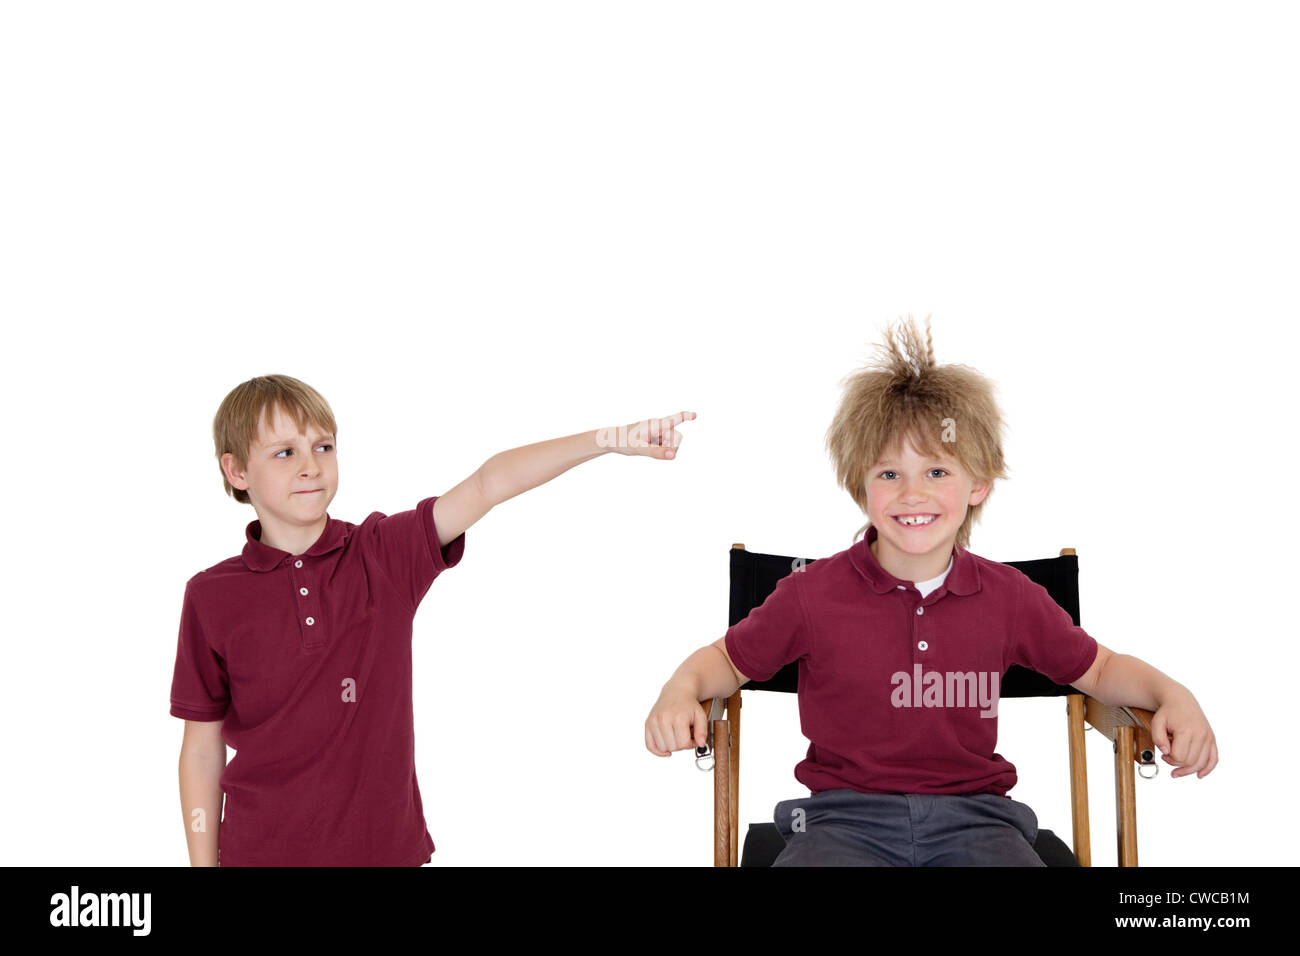 Portrait of school boy smiling while friend pointing at him over white background Stock Photo